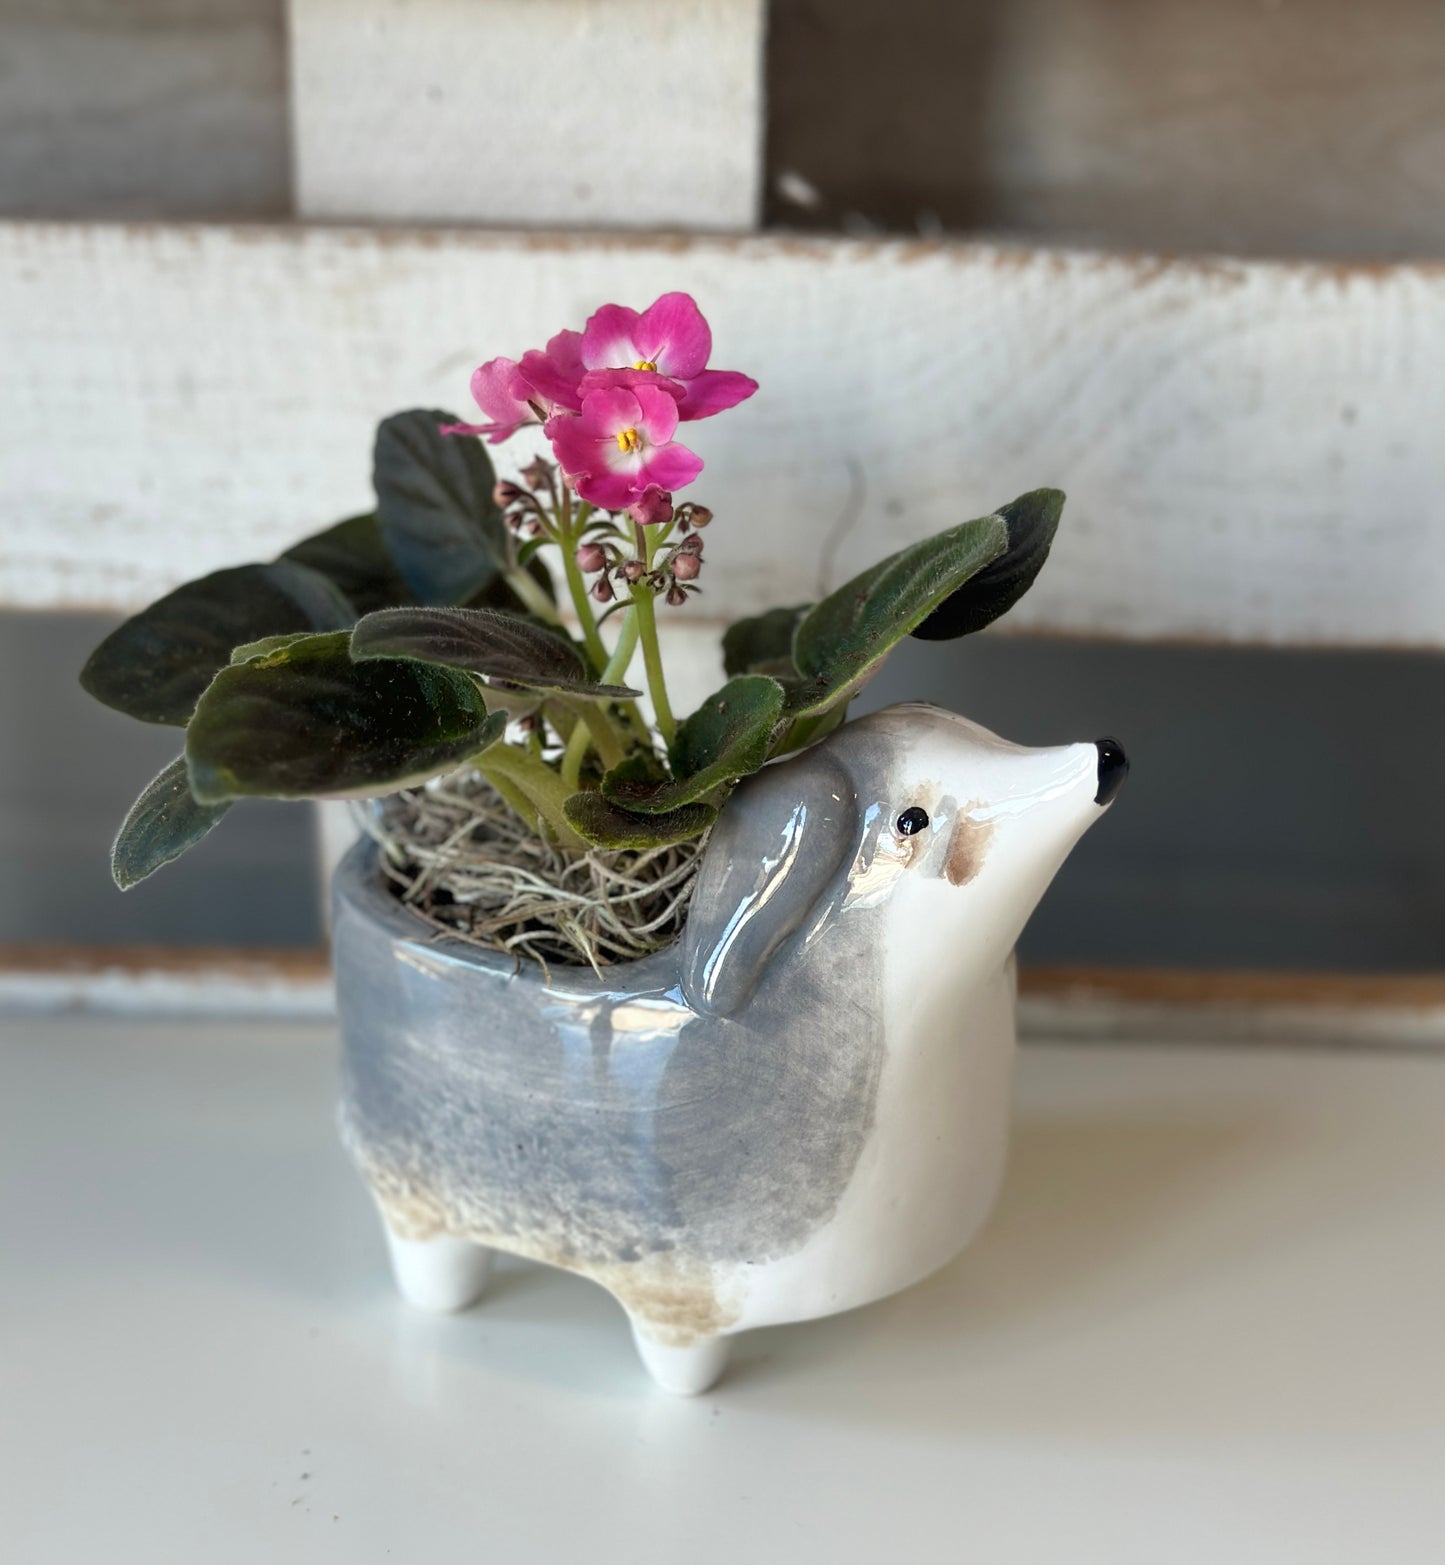 African Violet in Doggy Planter